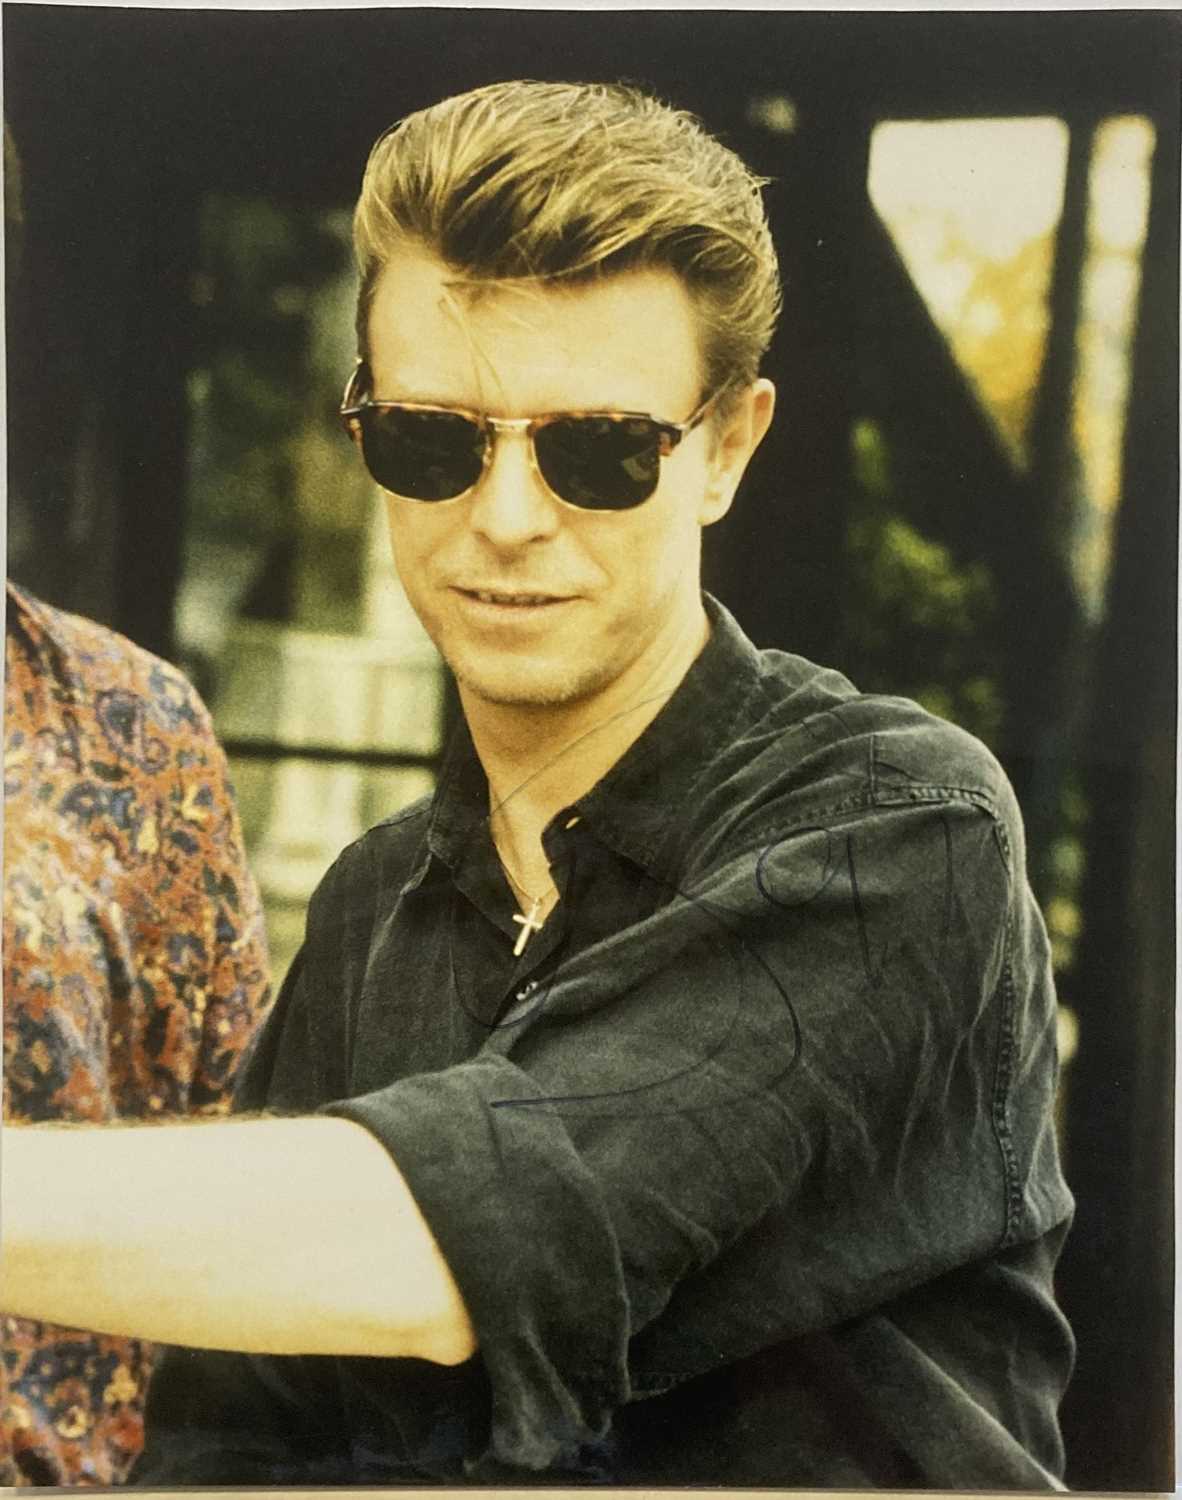 Lot 233 - DAVID BOWIE 1991 SIGNED PHOTO